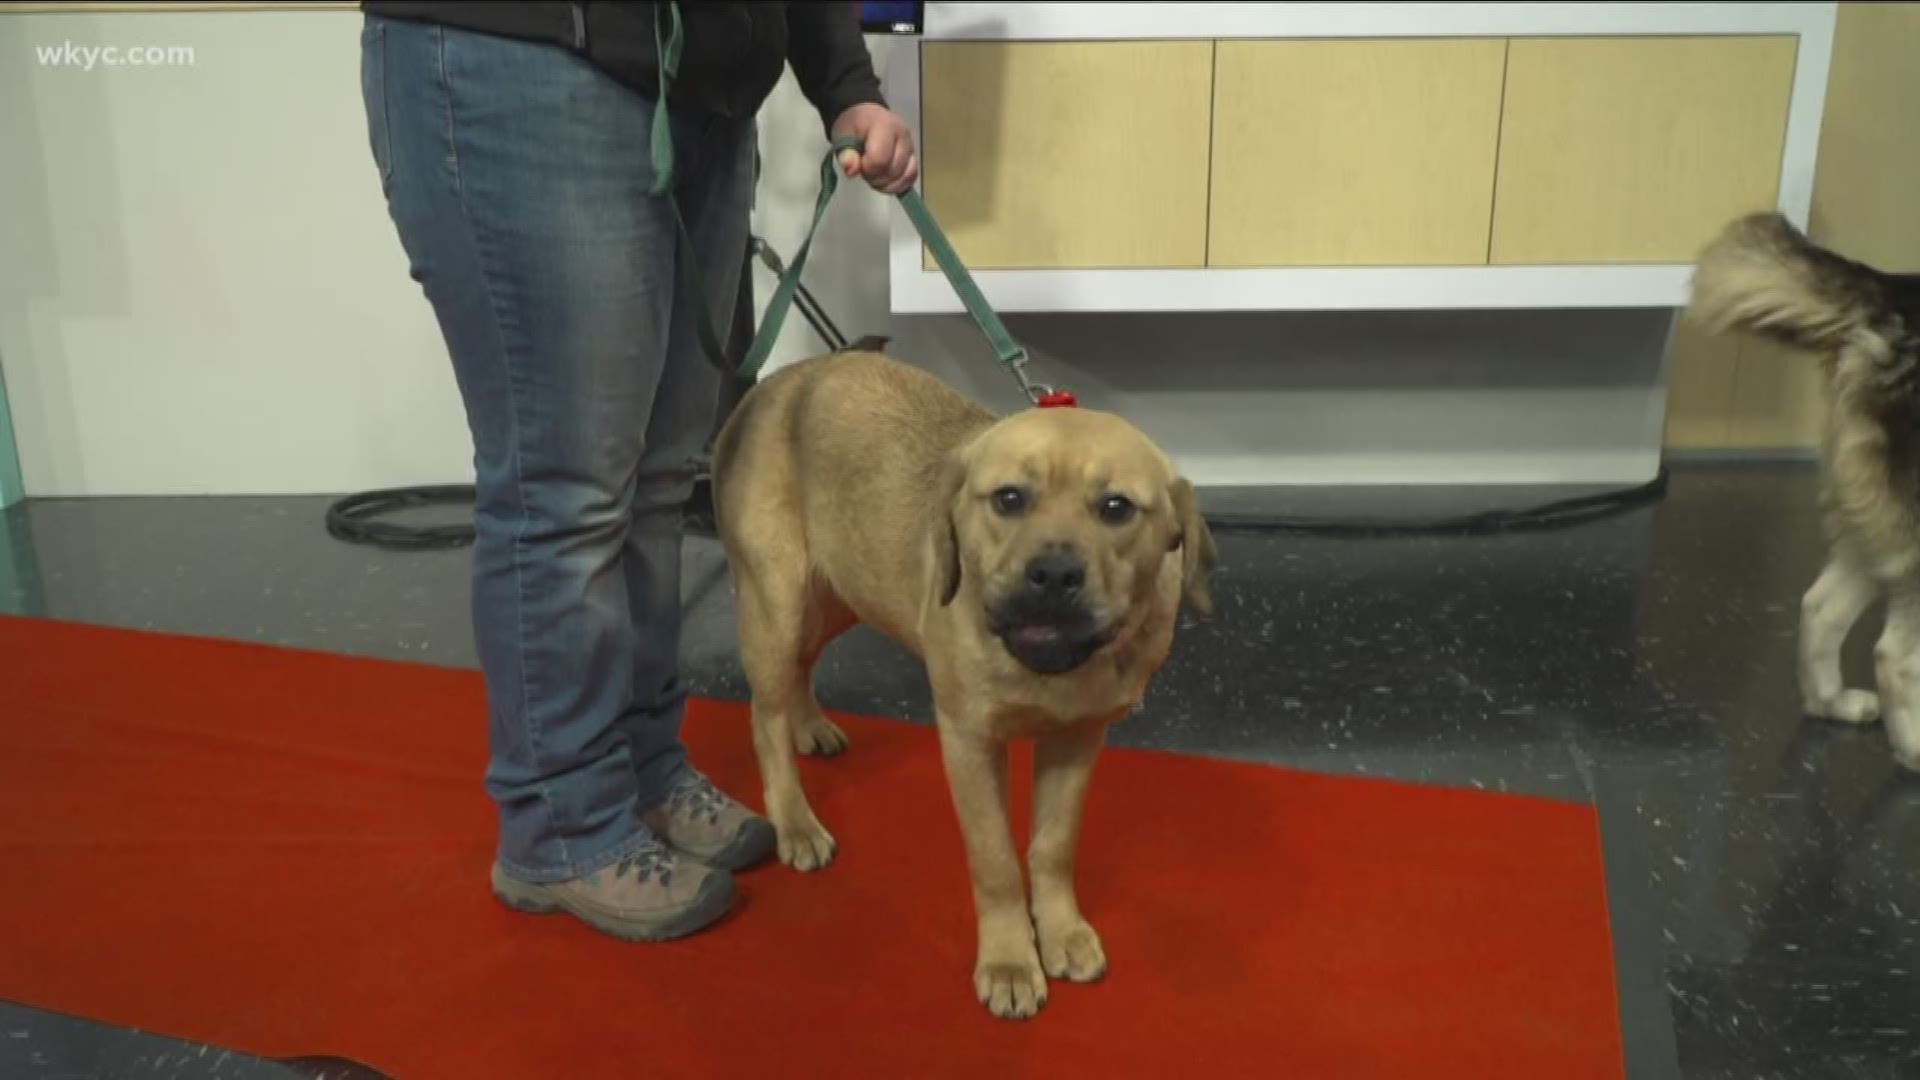 The Cleveland APL broke ground on it's new project. Some furry friends visited Jay and Betsy on Wednesday's What's New!